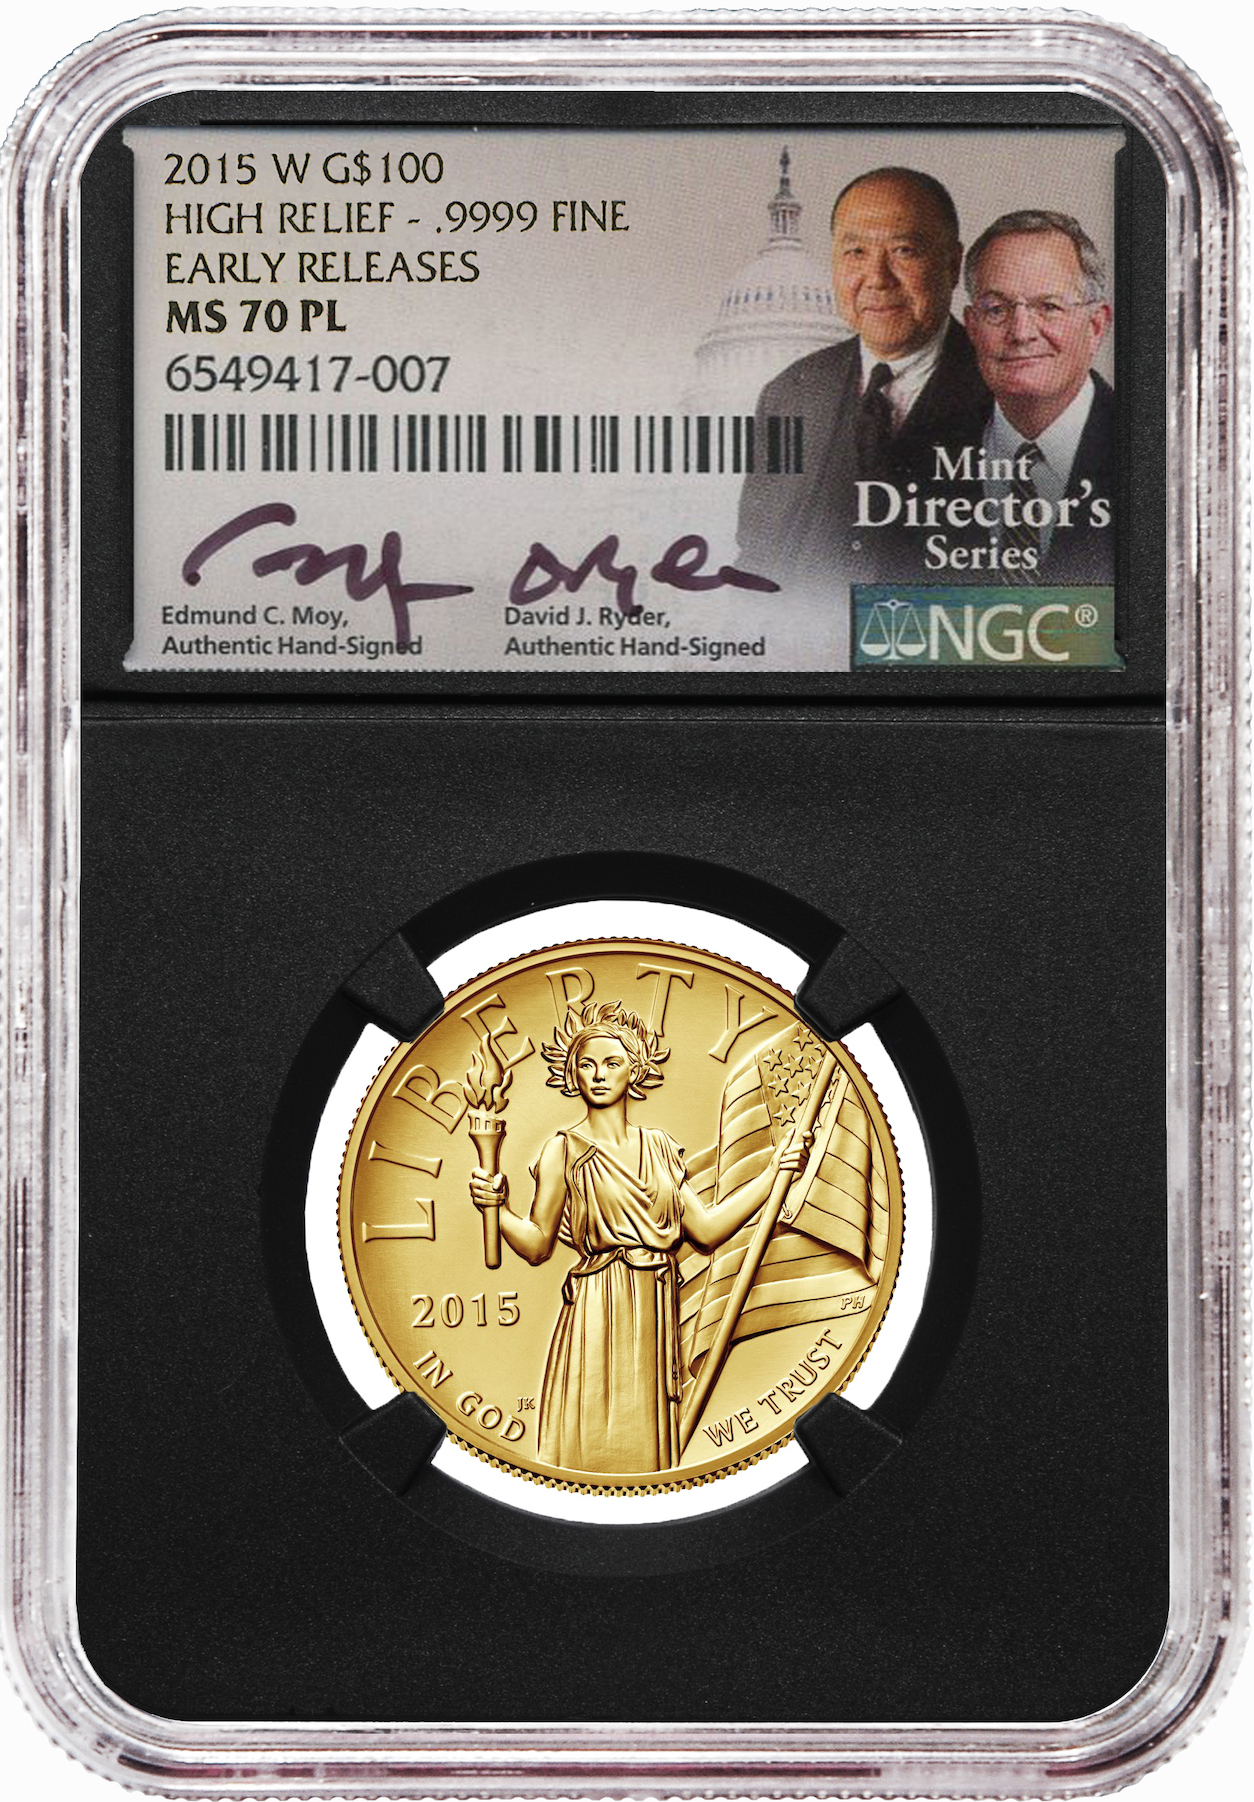 The United States Mint’s First-Ever $100 Gold Coin